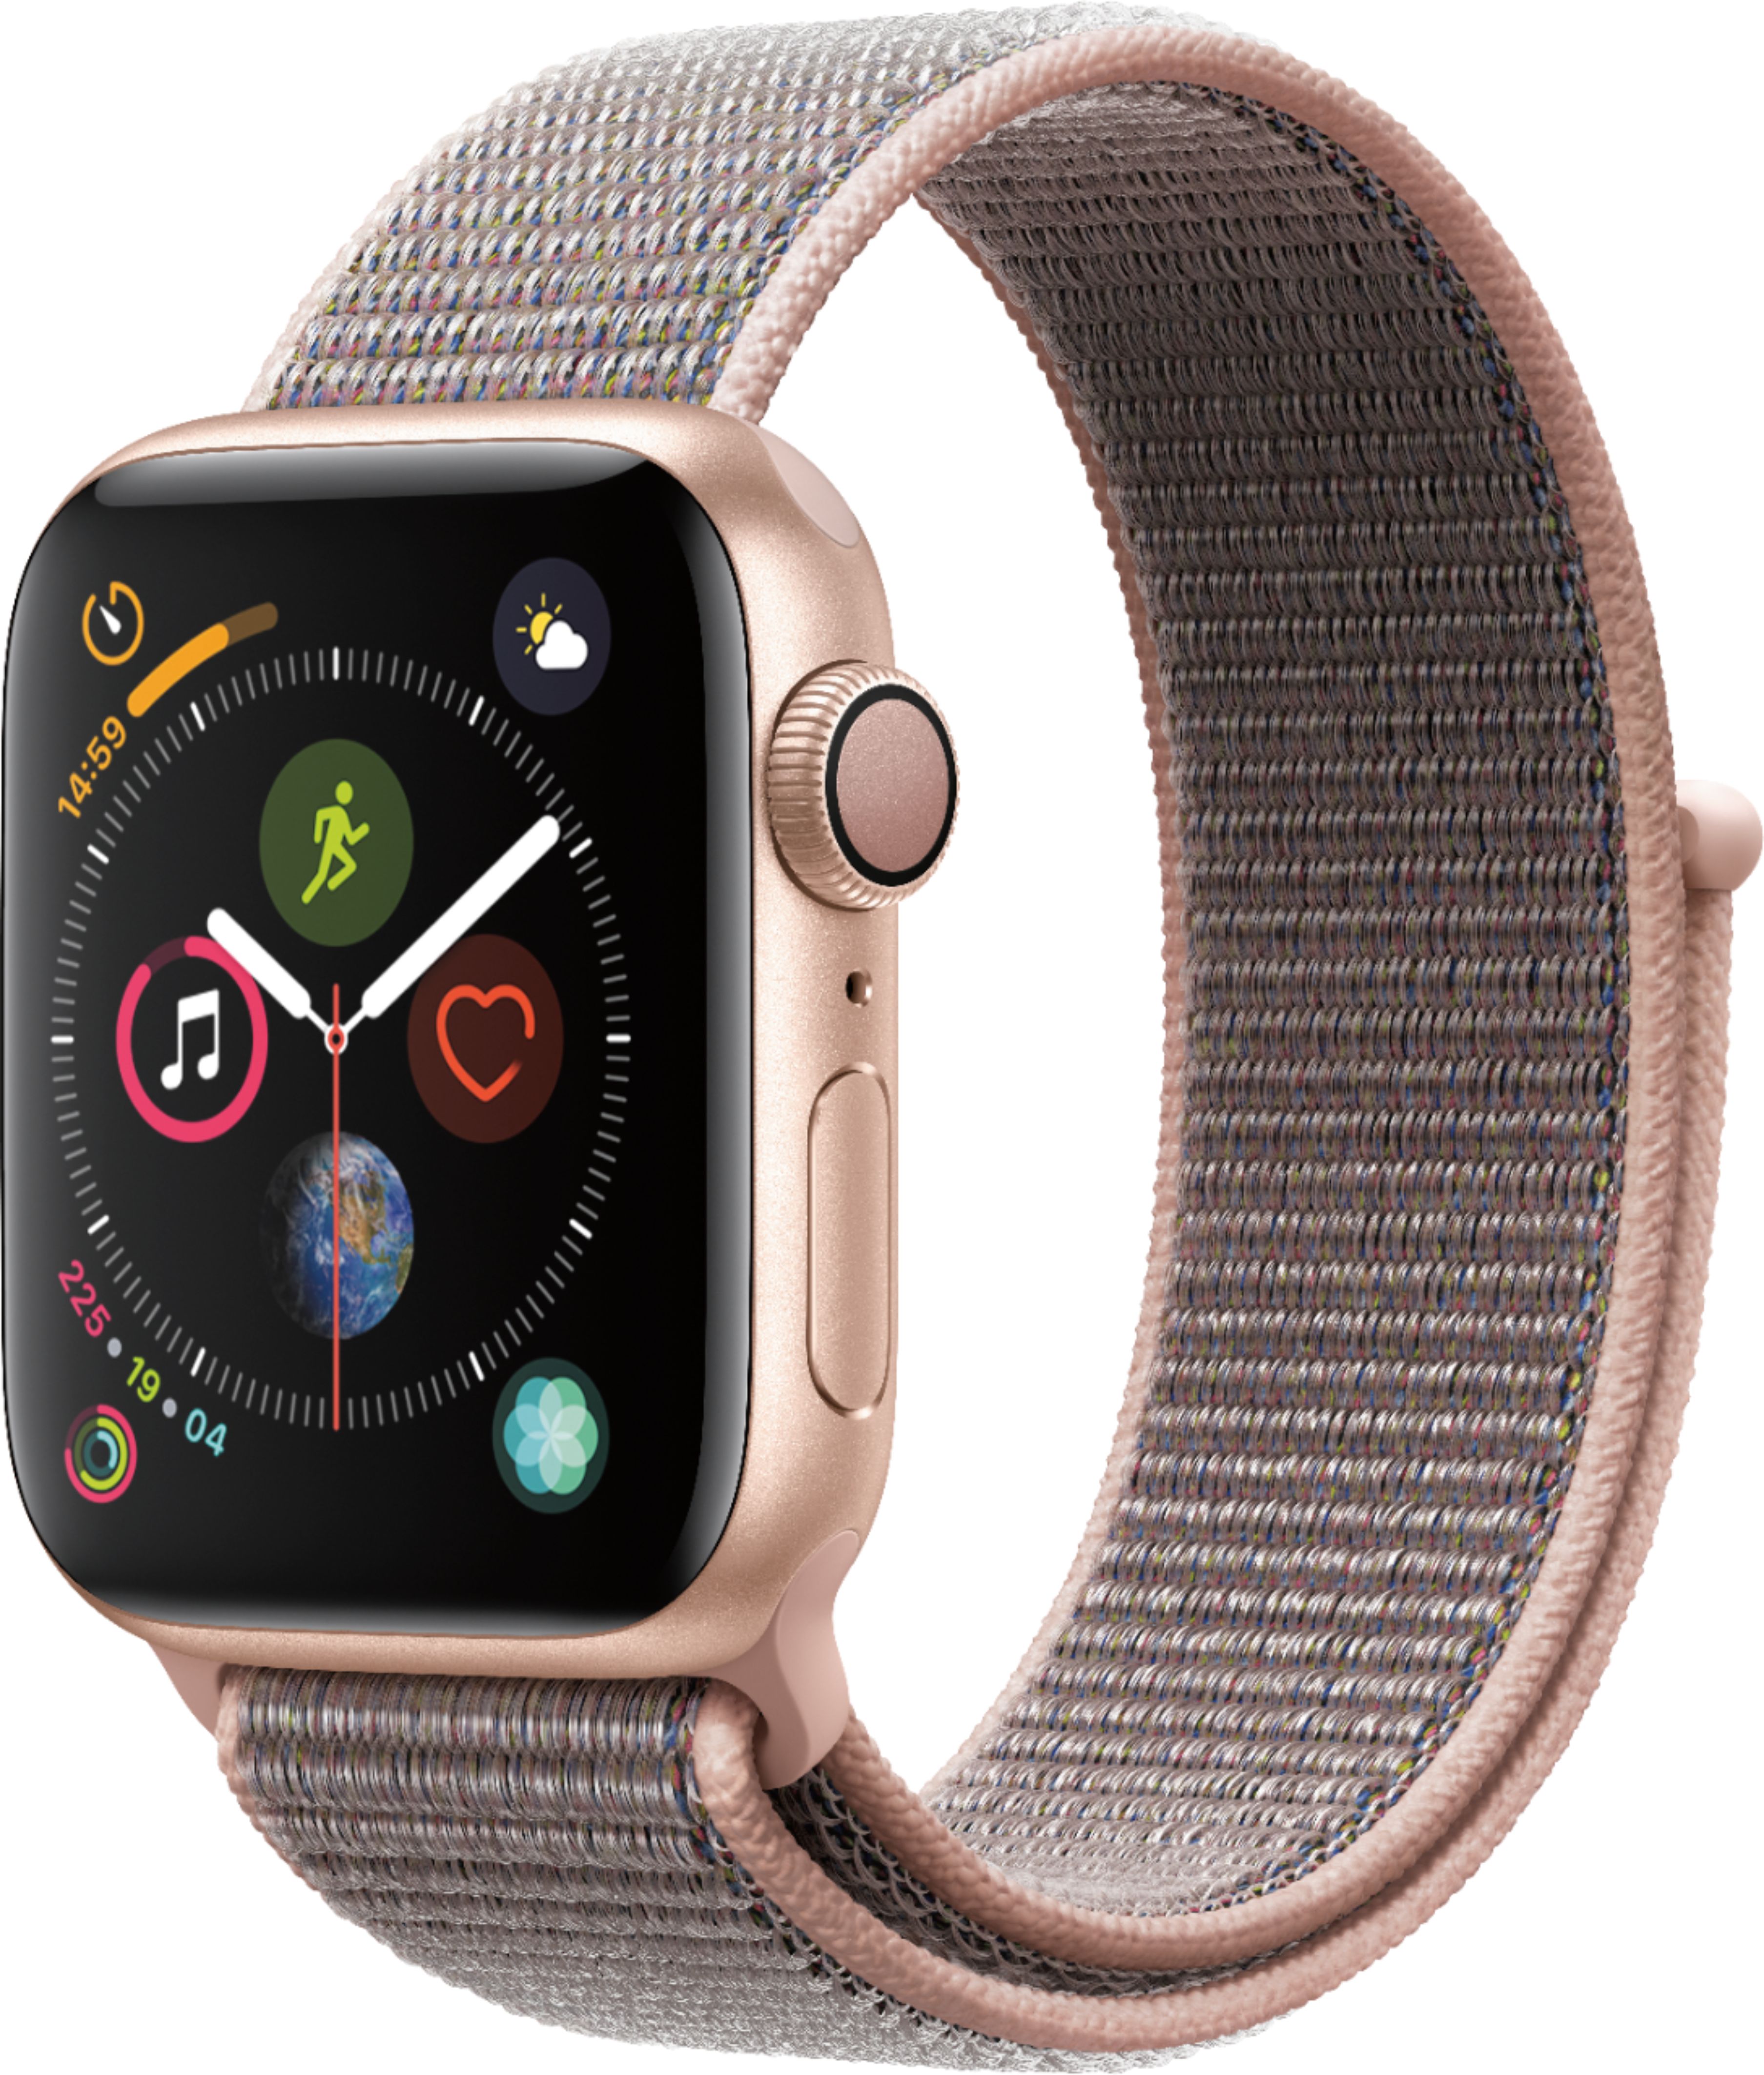 Geek Squad Certified Refurbished Apple Watch Series 4 (GPS) 40mm Gold Aluminum Case with Pink Sand Sport Loop - Gold Aluminum